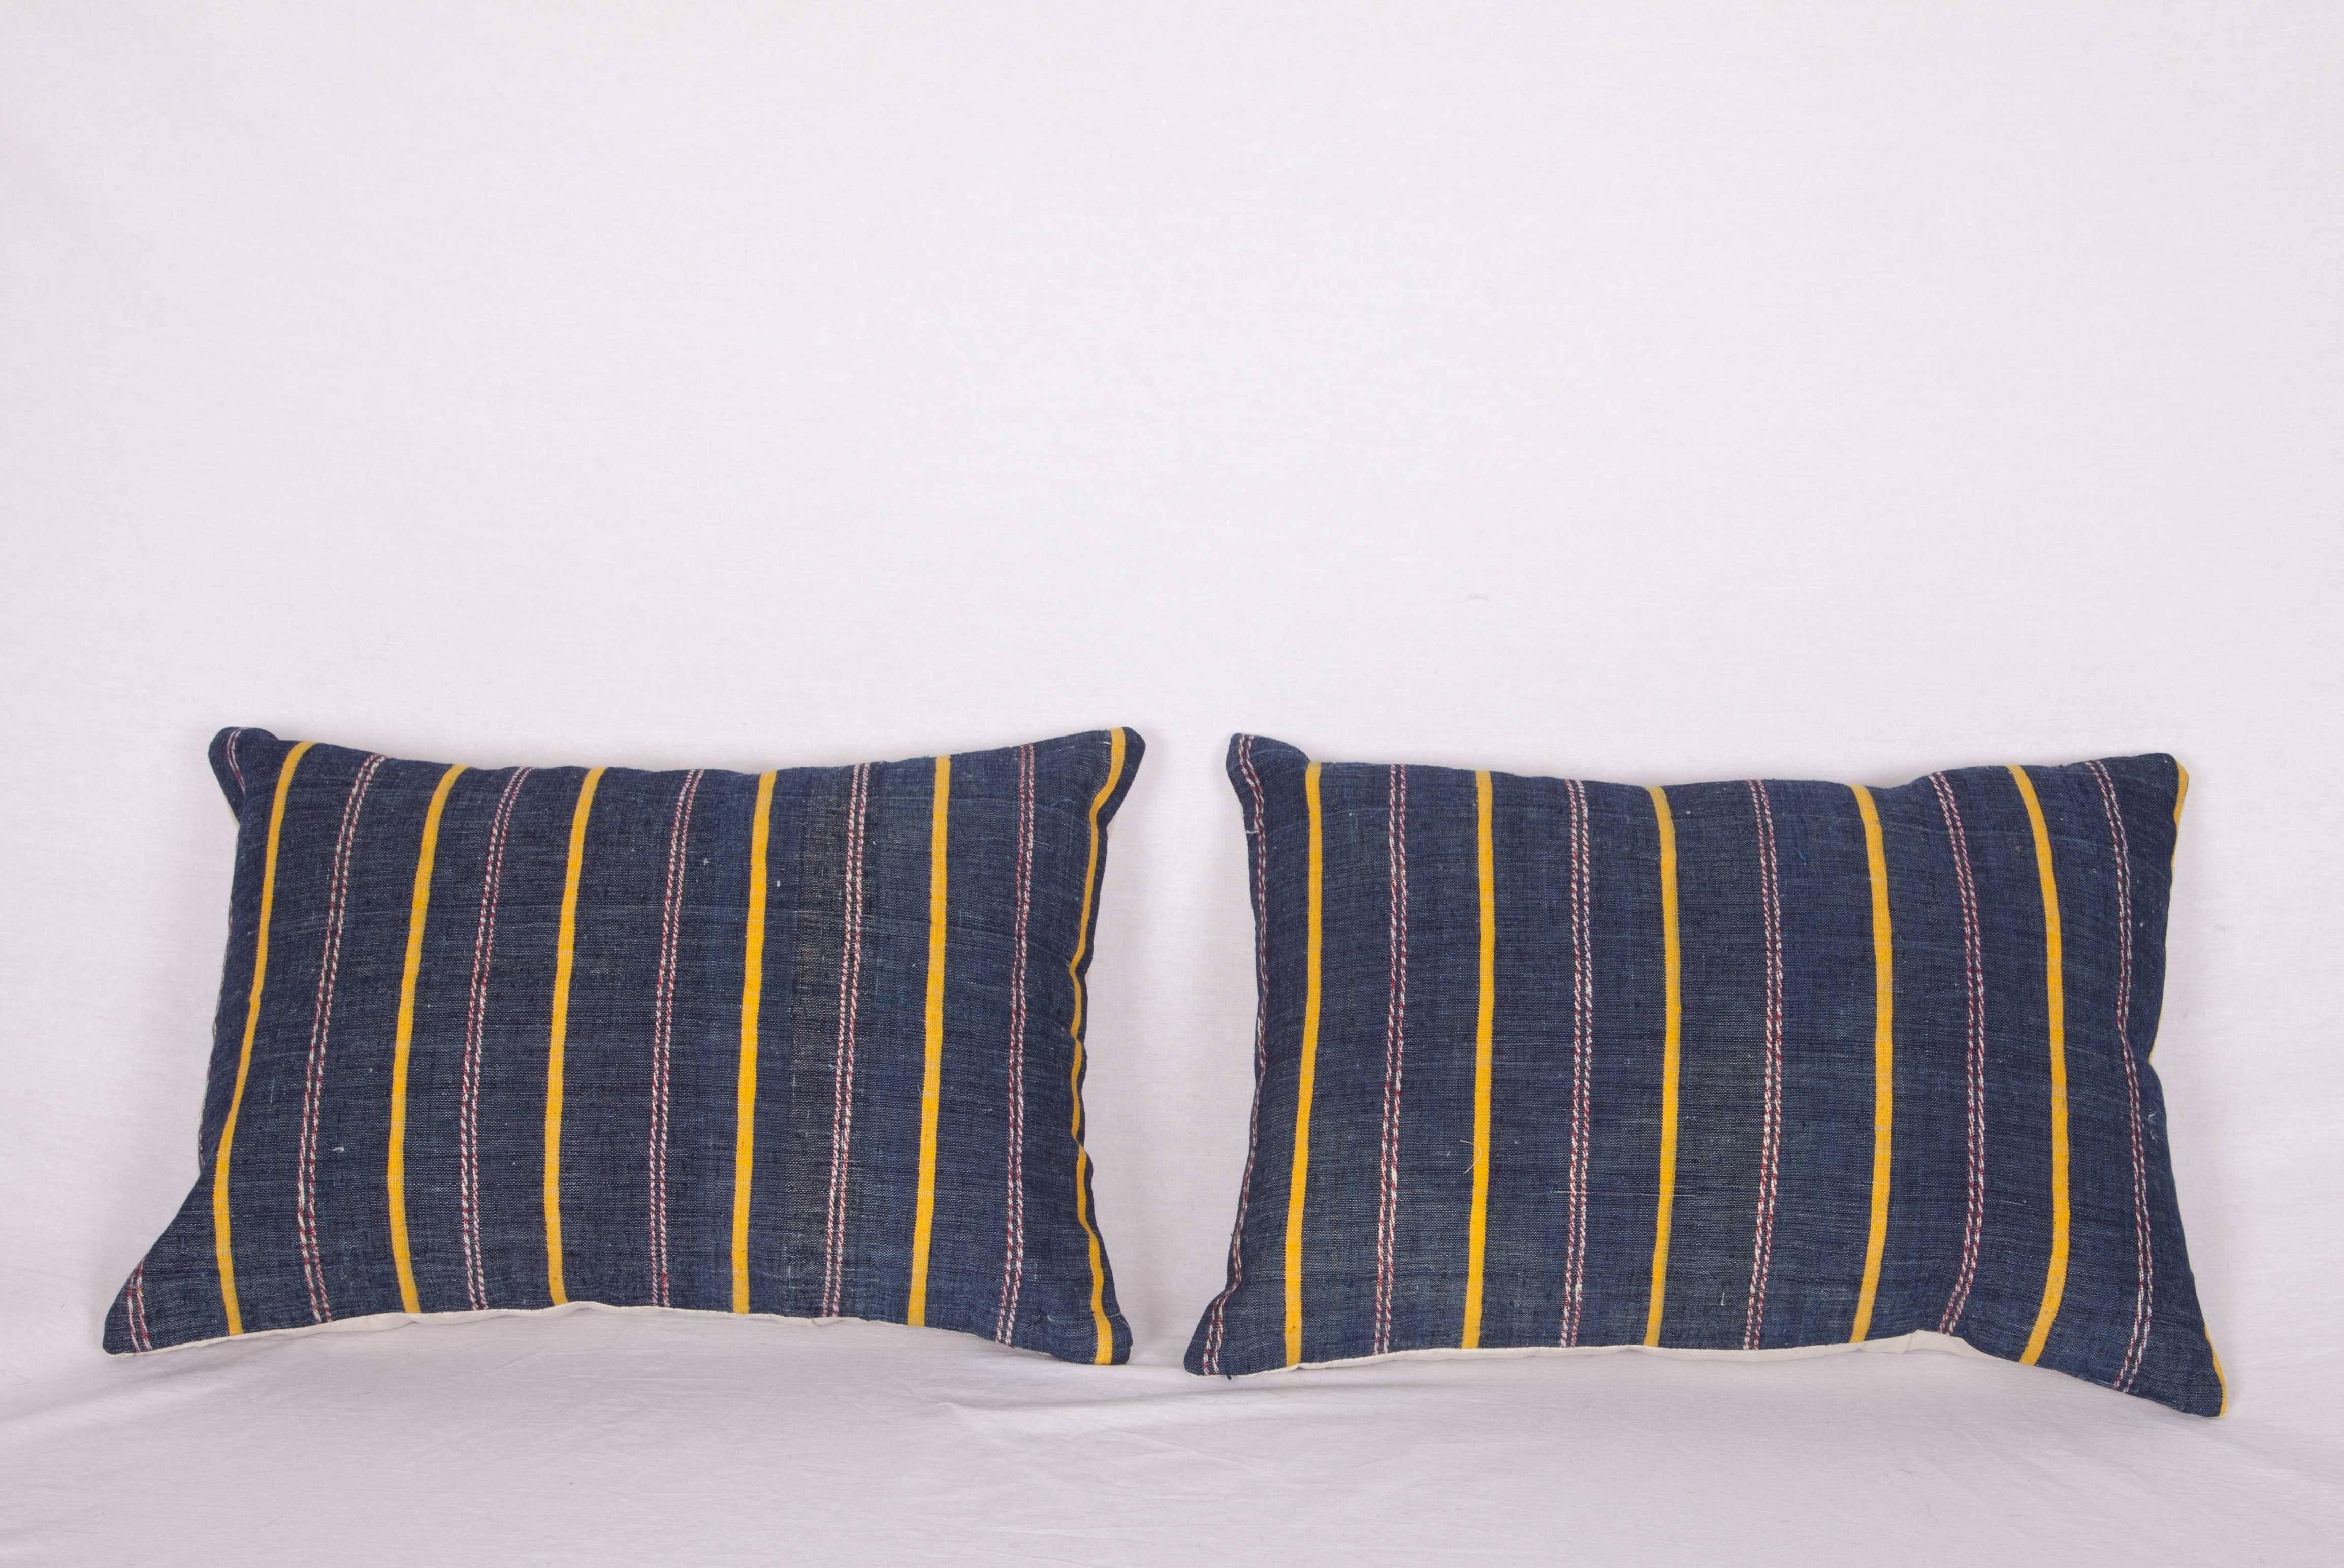 The pillows are made out of a mid-20th century, Turkish Kilim. They do not come with an insert but they come with a bag made to the size and out of cotton to accommodate the filling. The backing is made of linen. Please note filling is not provided.